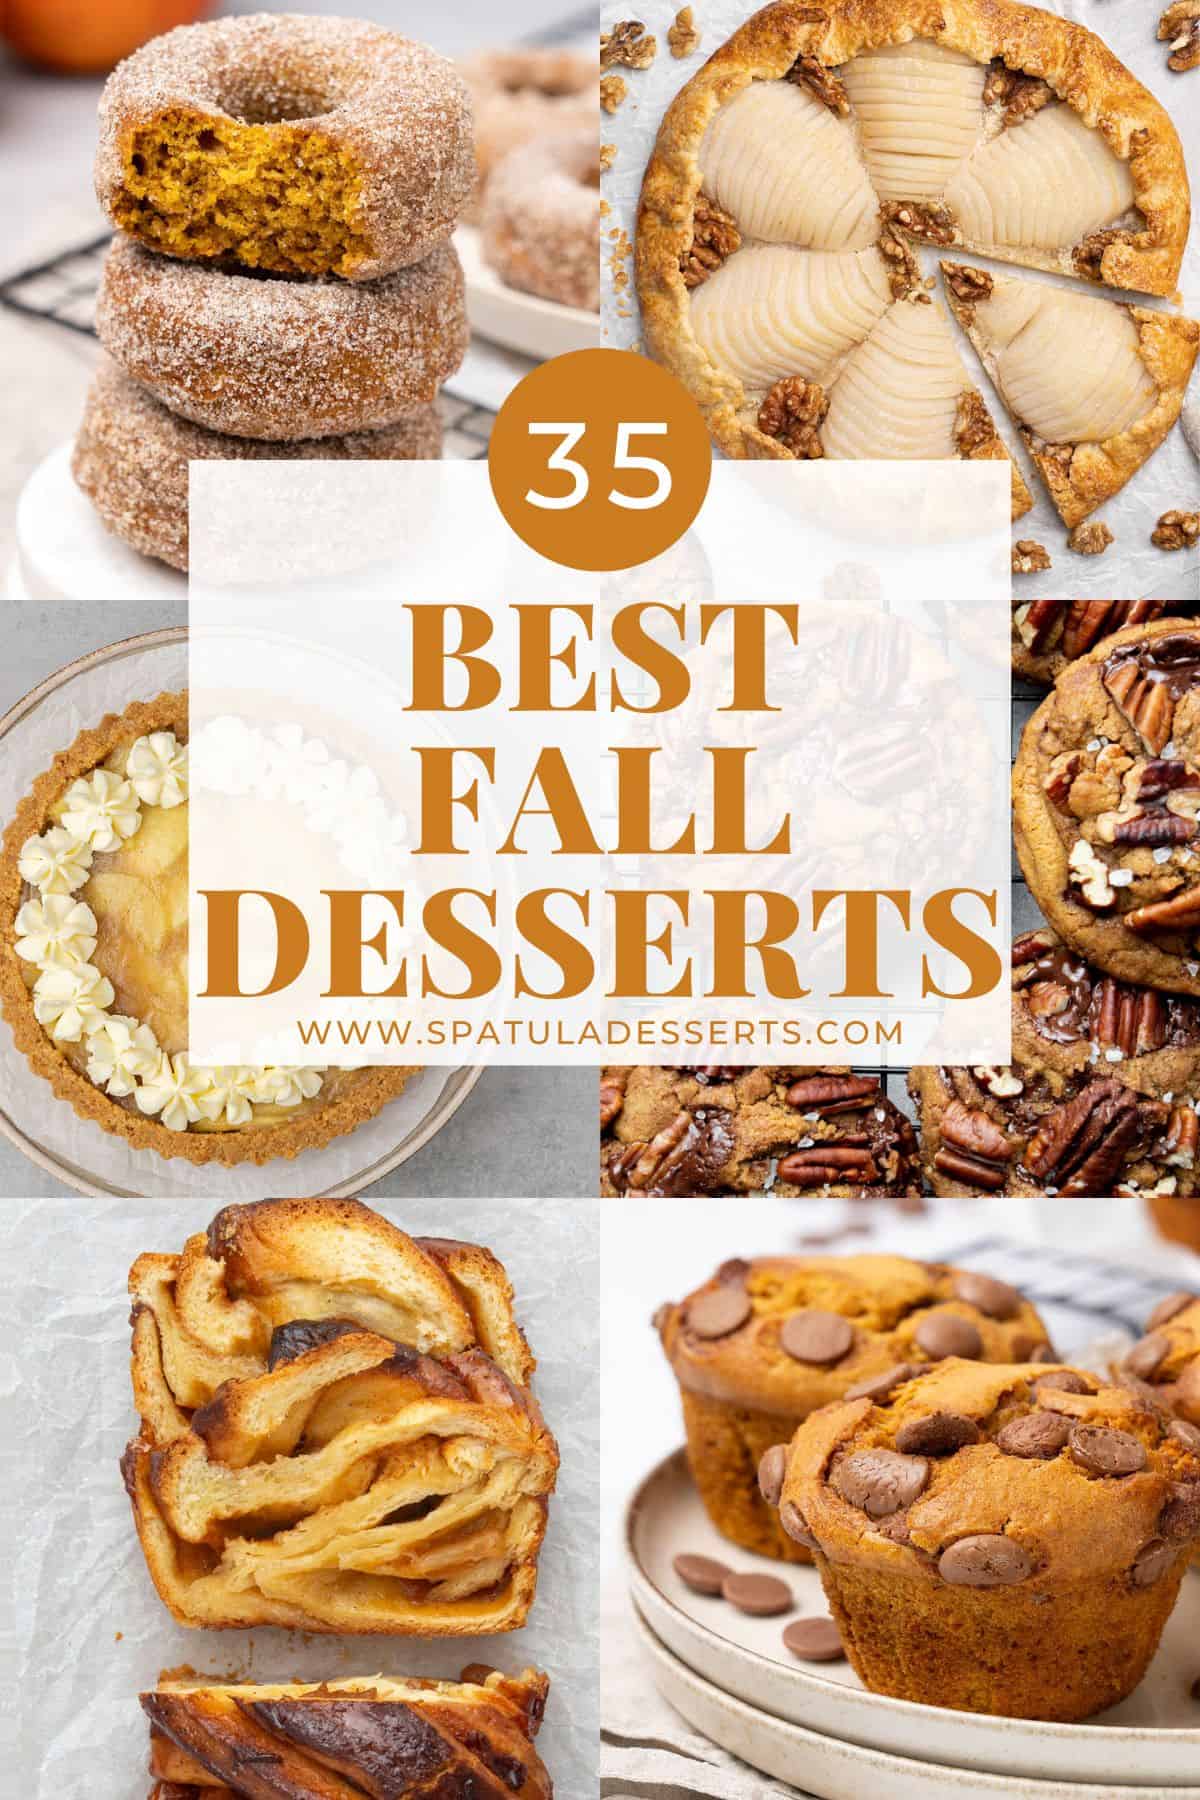 35 Best Fall Desserts collection.